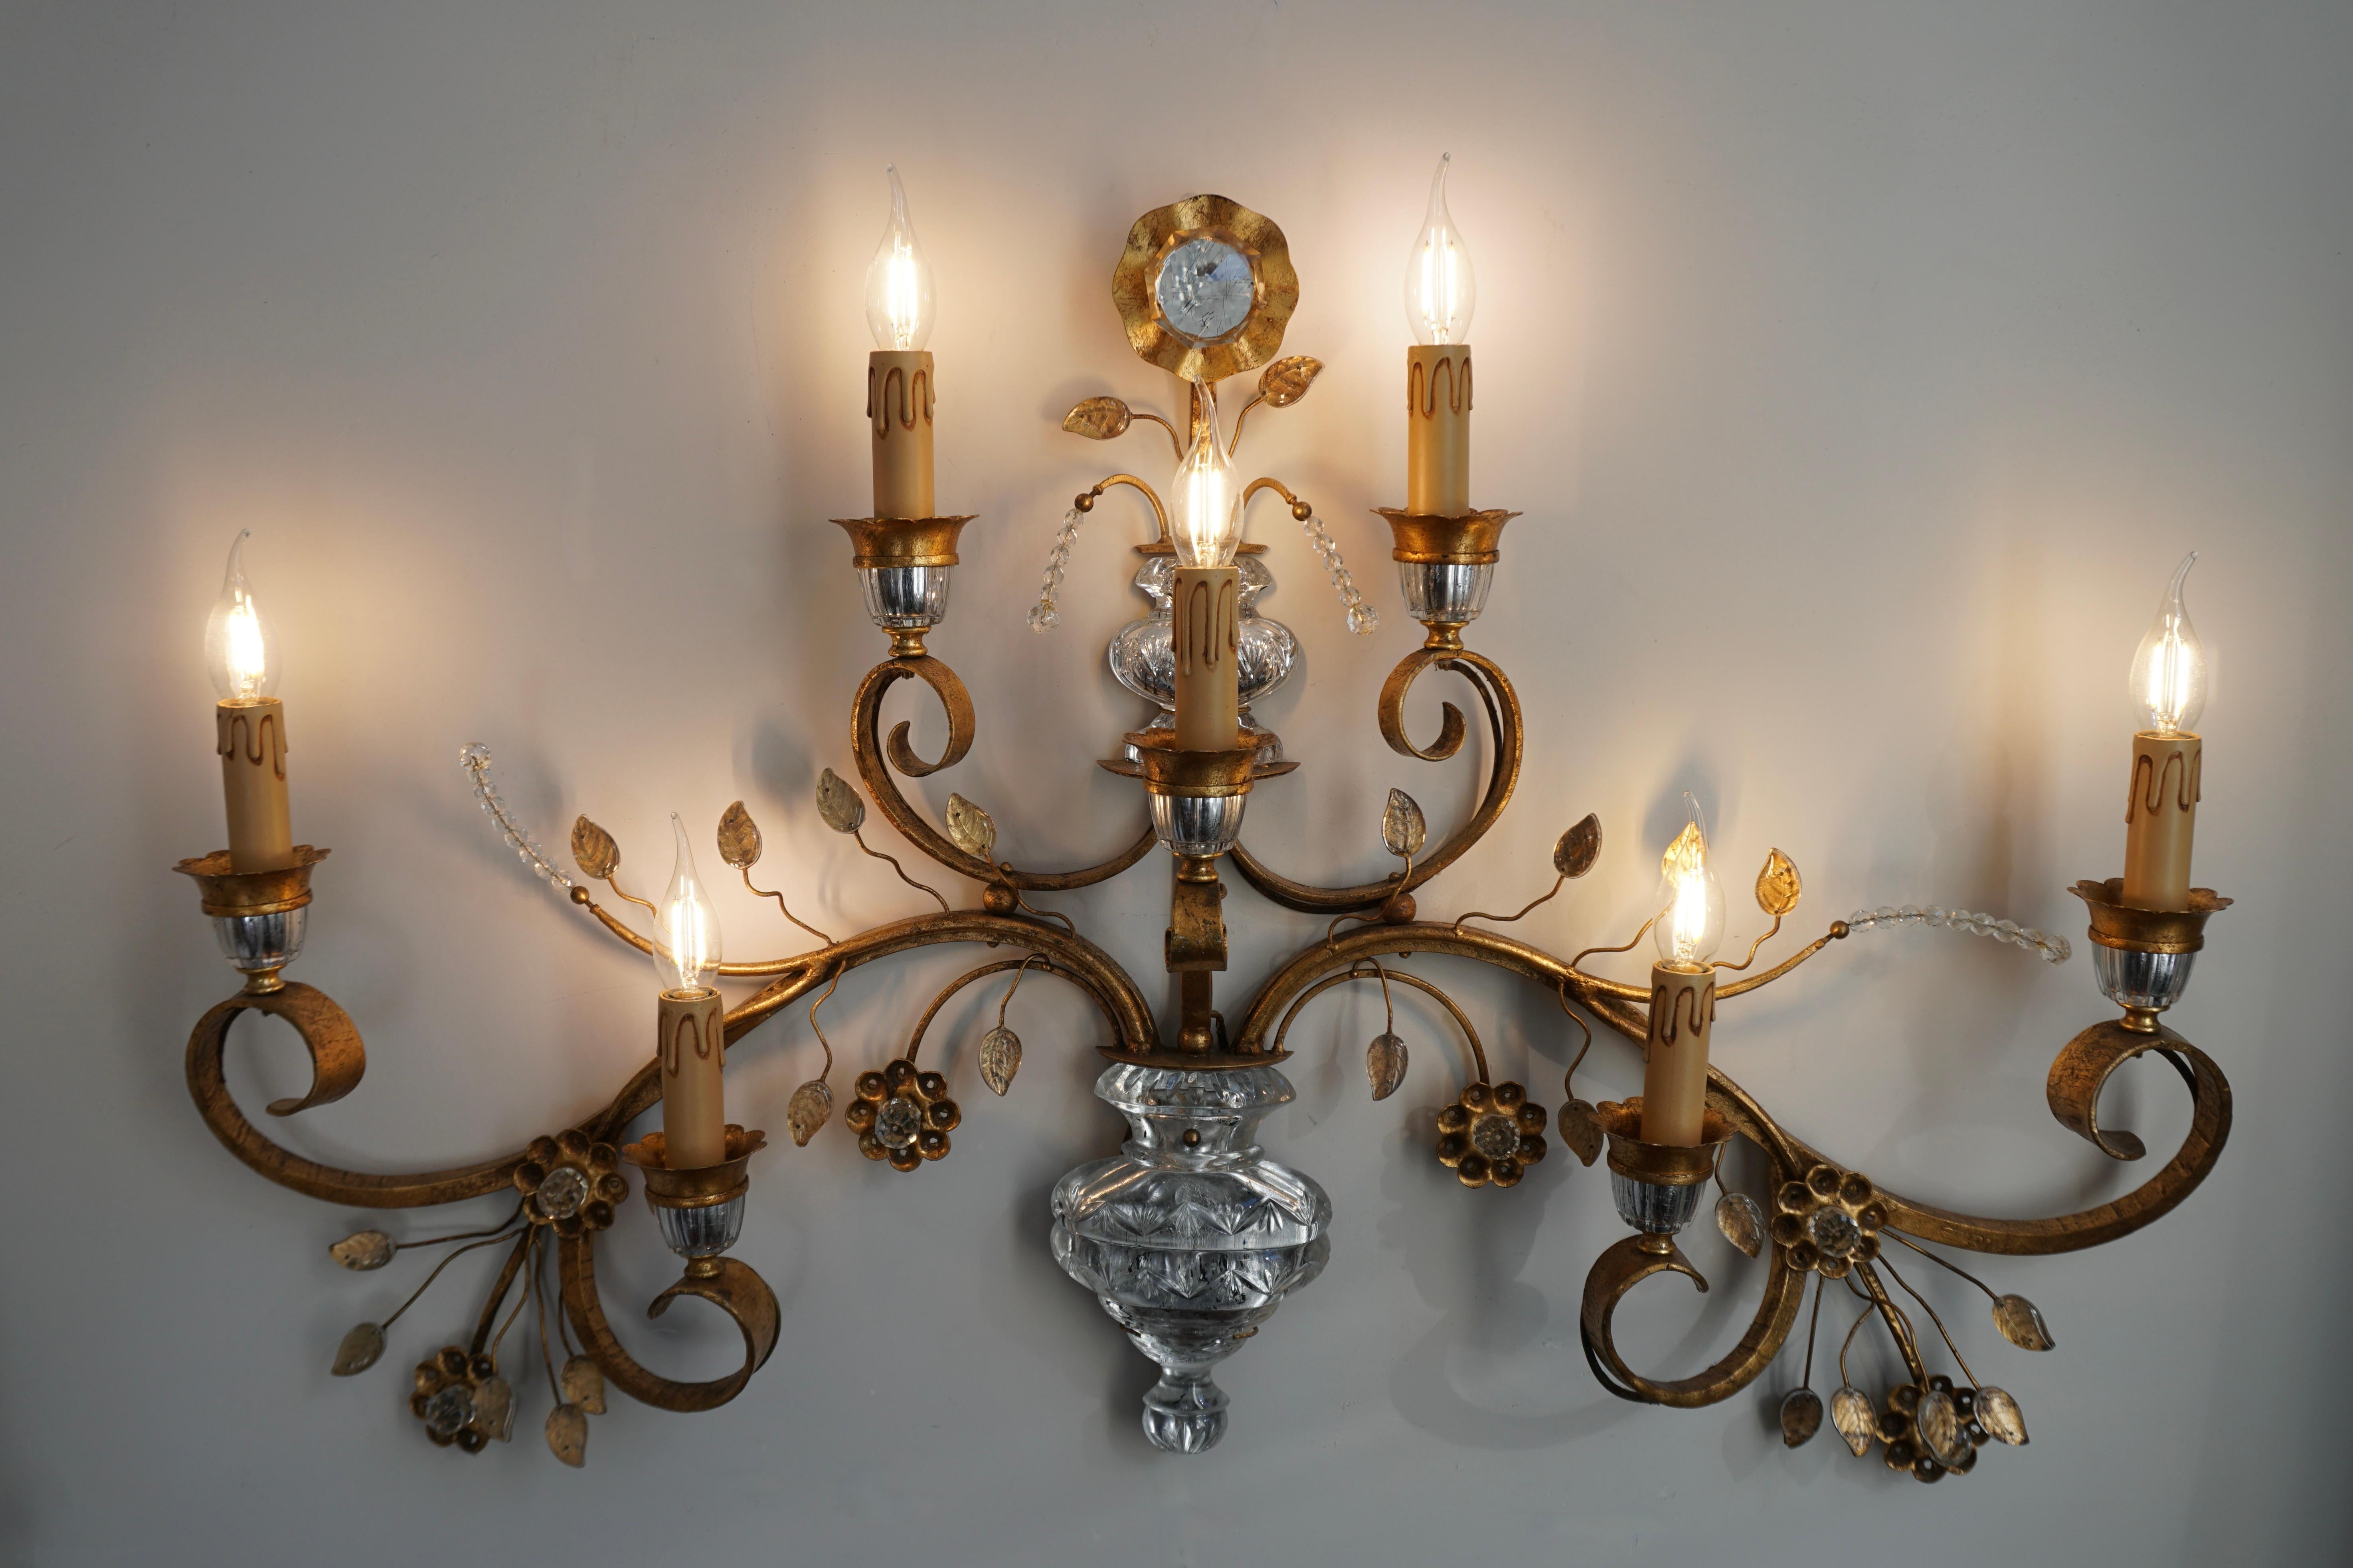 Italian Gilded Metal Leaf and Glass Flower Wall Sconce Light Fixture For Sale